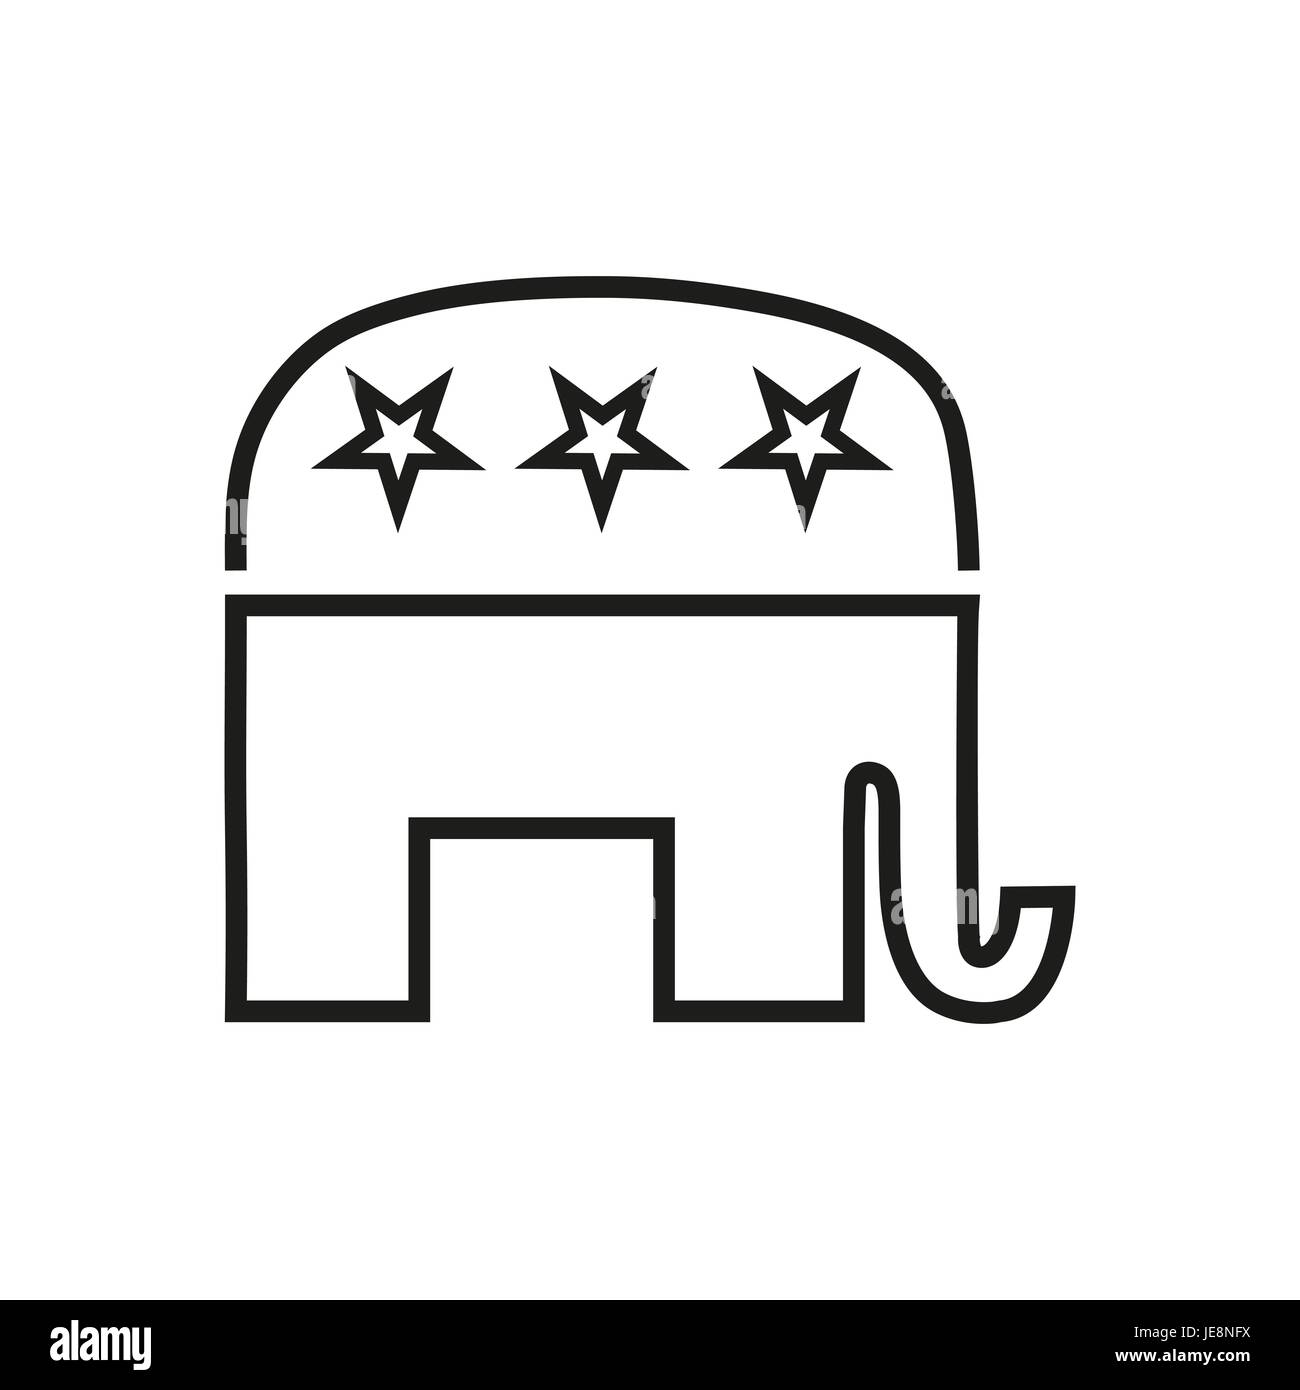 Vector illustration of the USA Republican party symbol - the elephant on white background Stock Vector